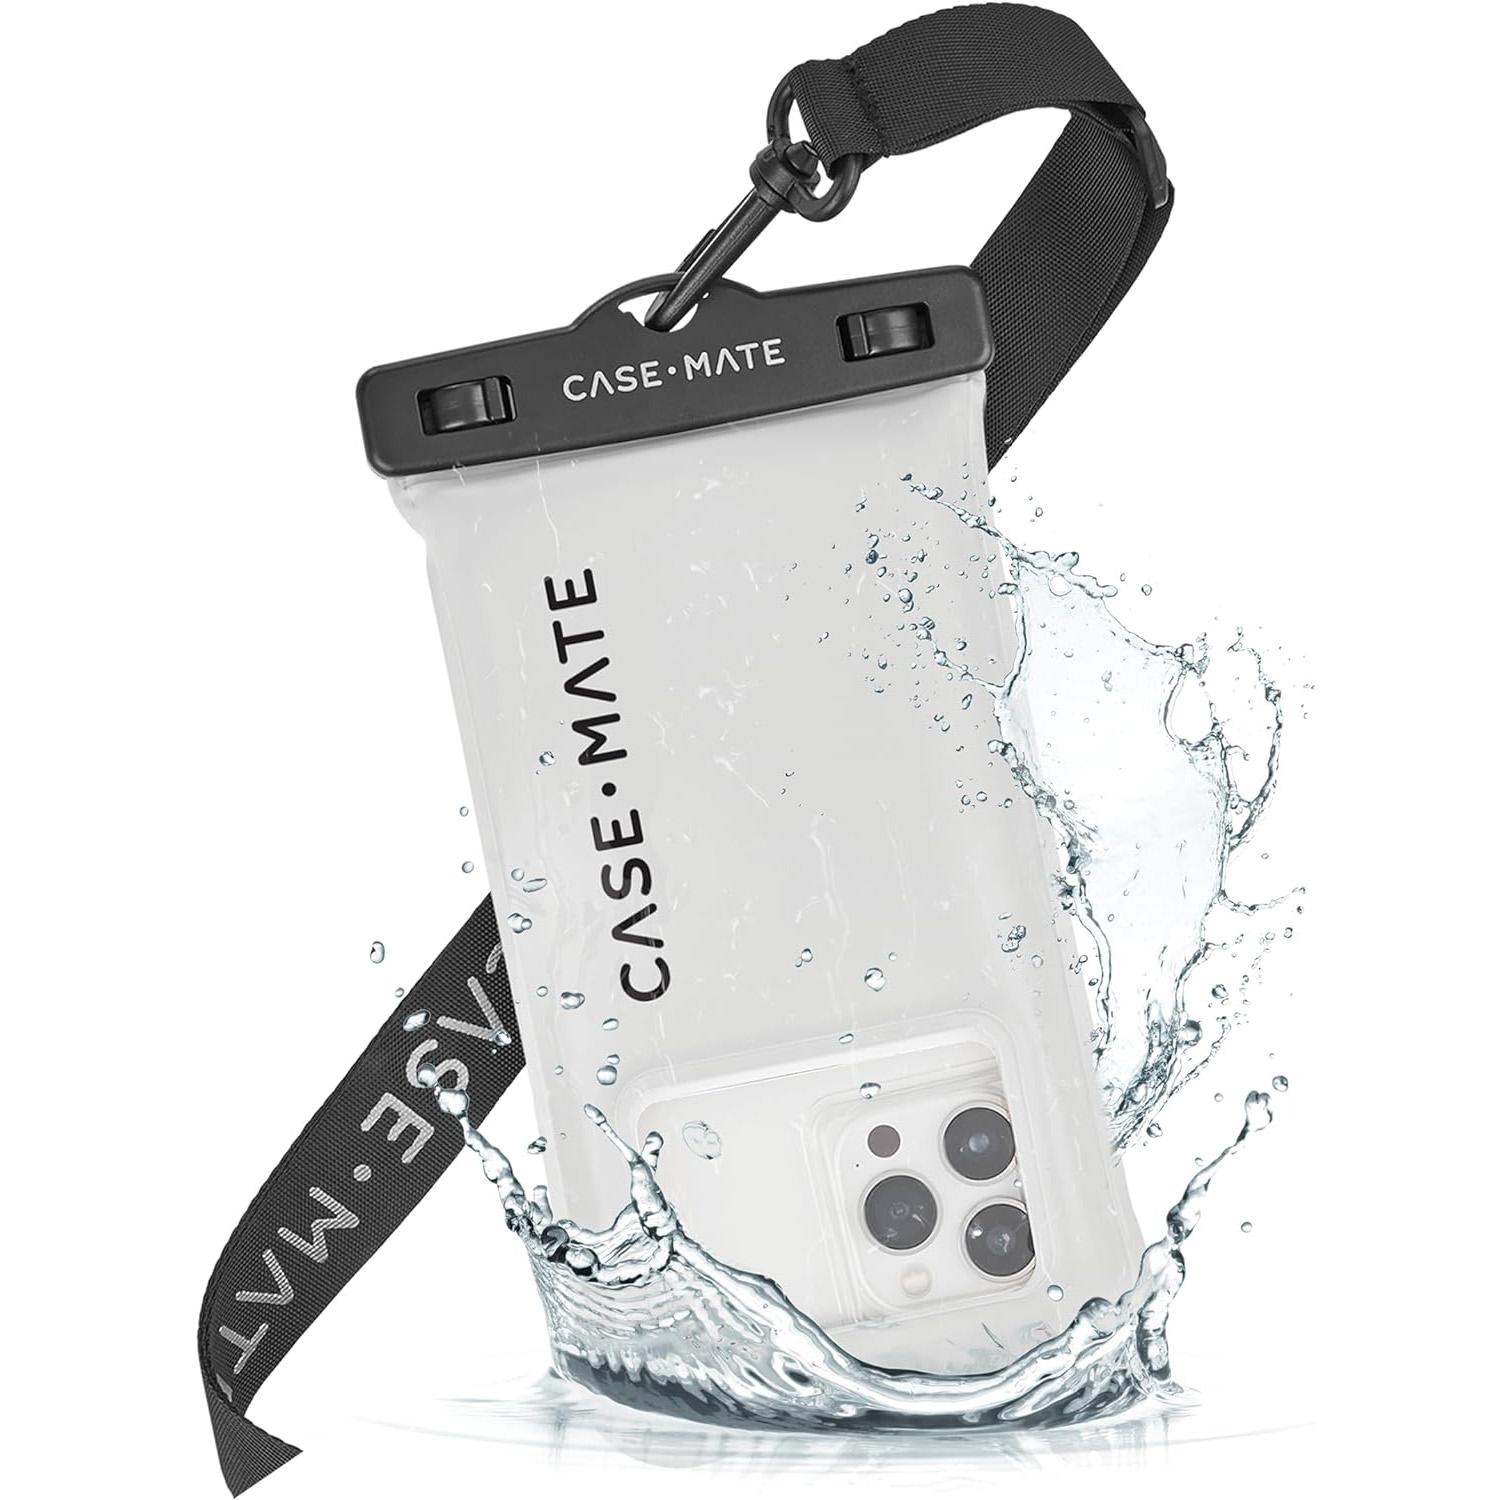 Case-Mate Waterproof Pool Floating Smartphone Pouch for $11.19